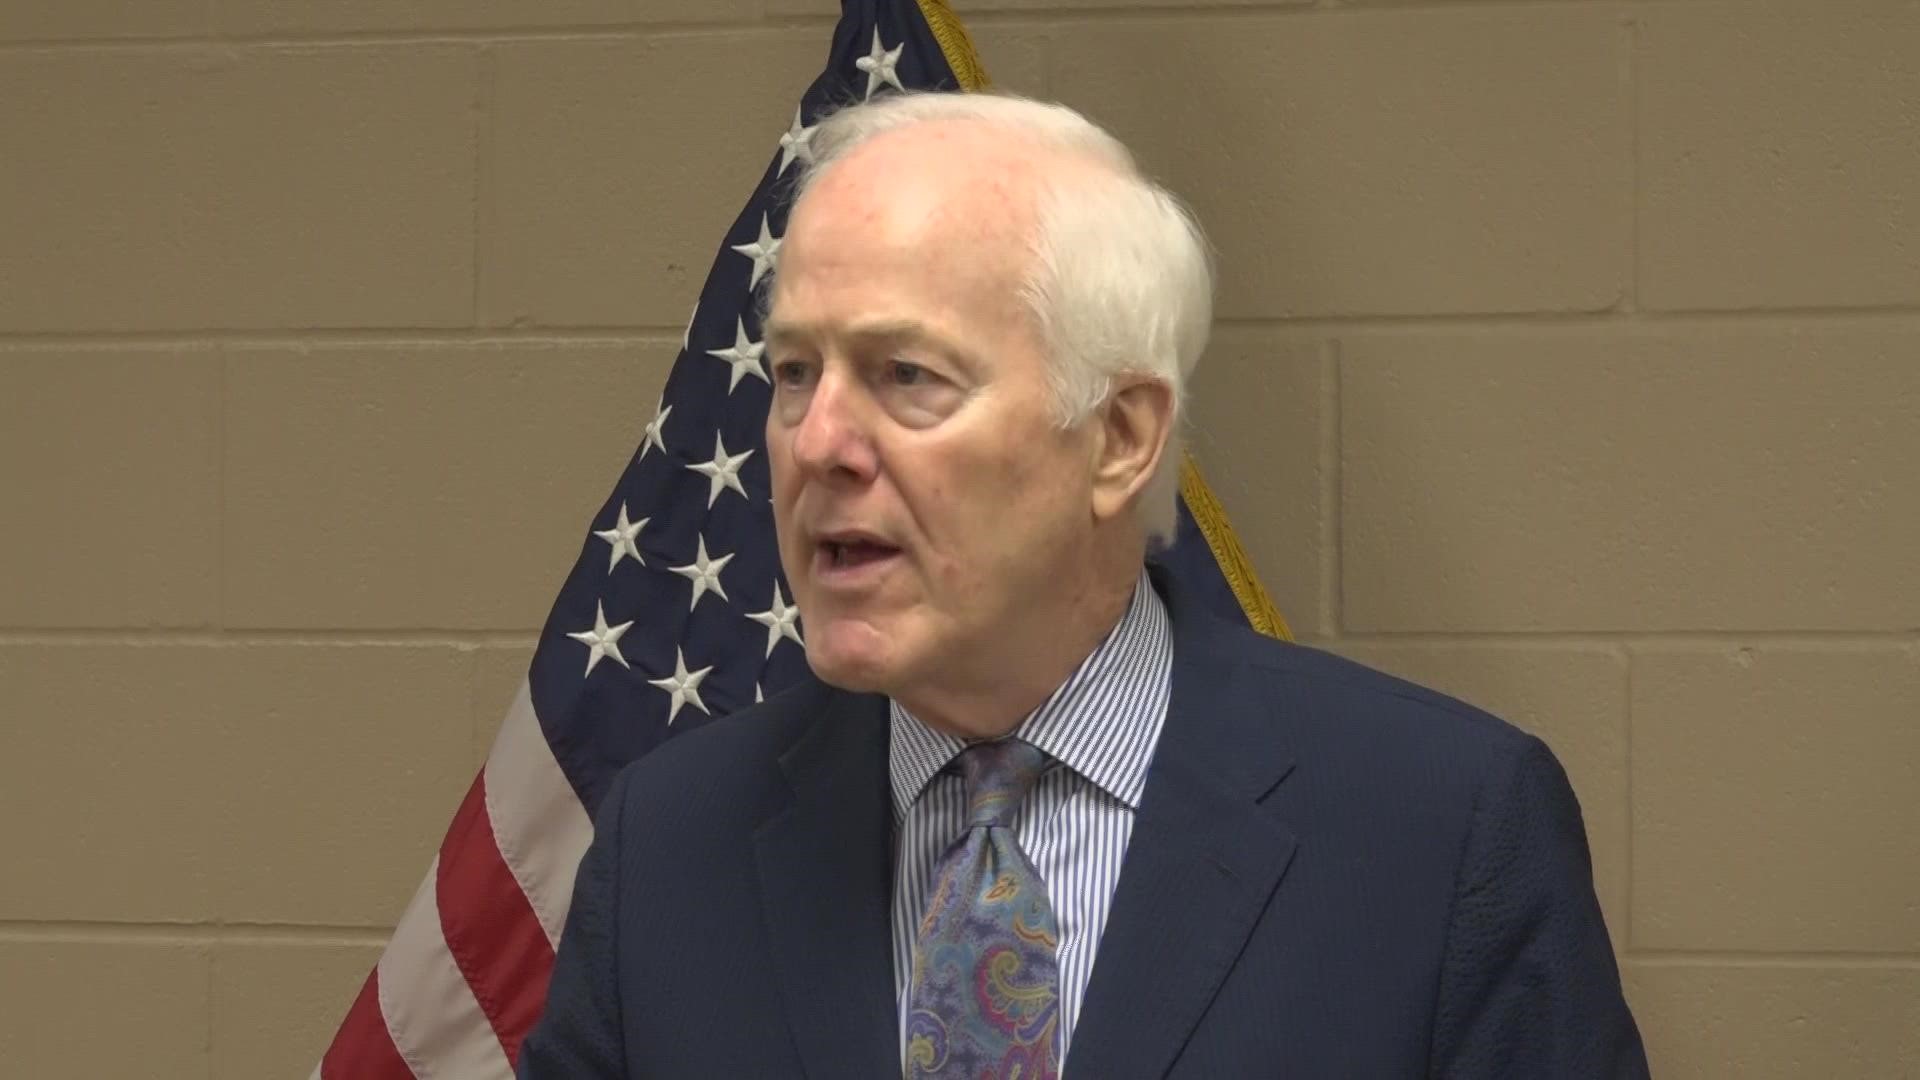 In a news conference on Monday, US Senator John Cornyn said some of his priorities include keeping guns away from criminals and the mentally ill.